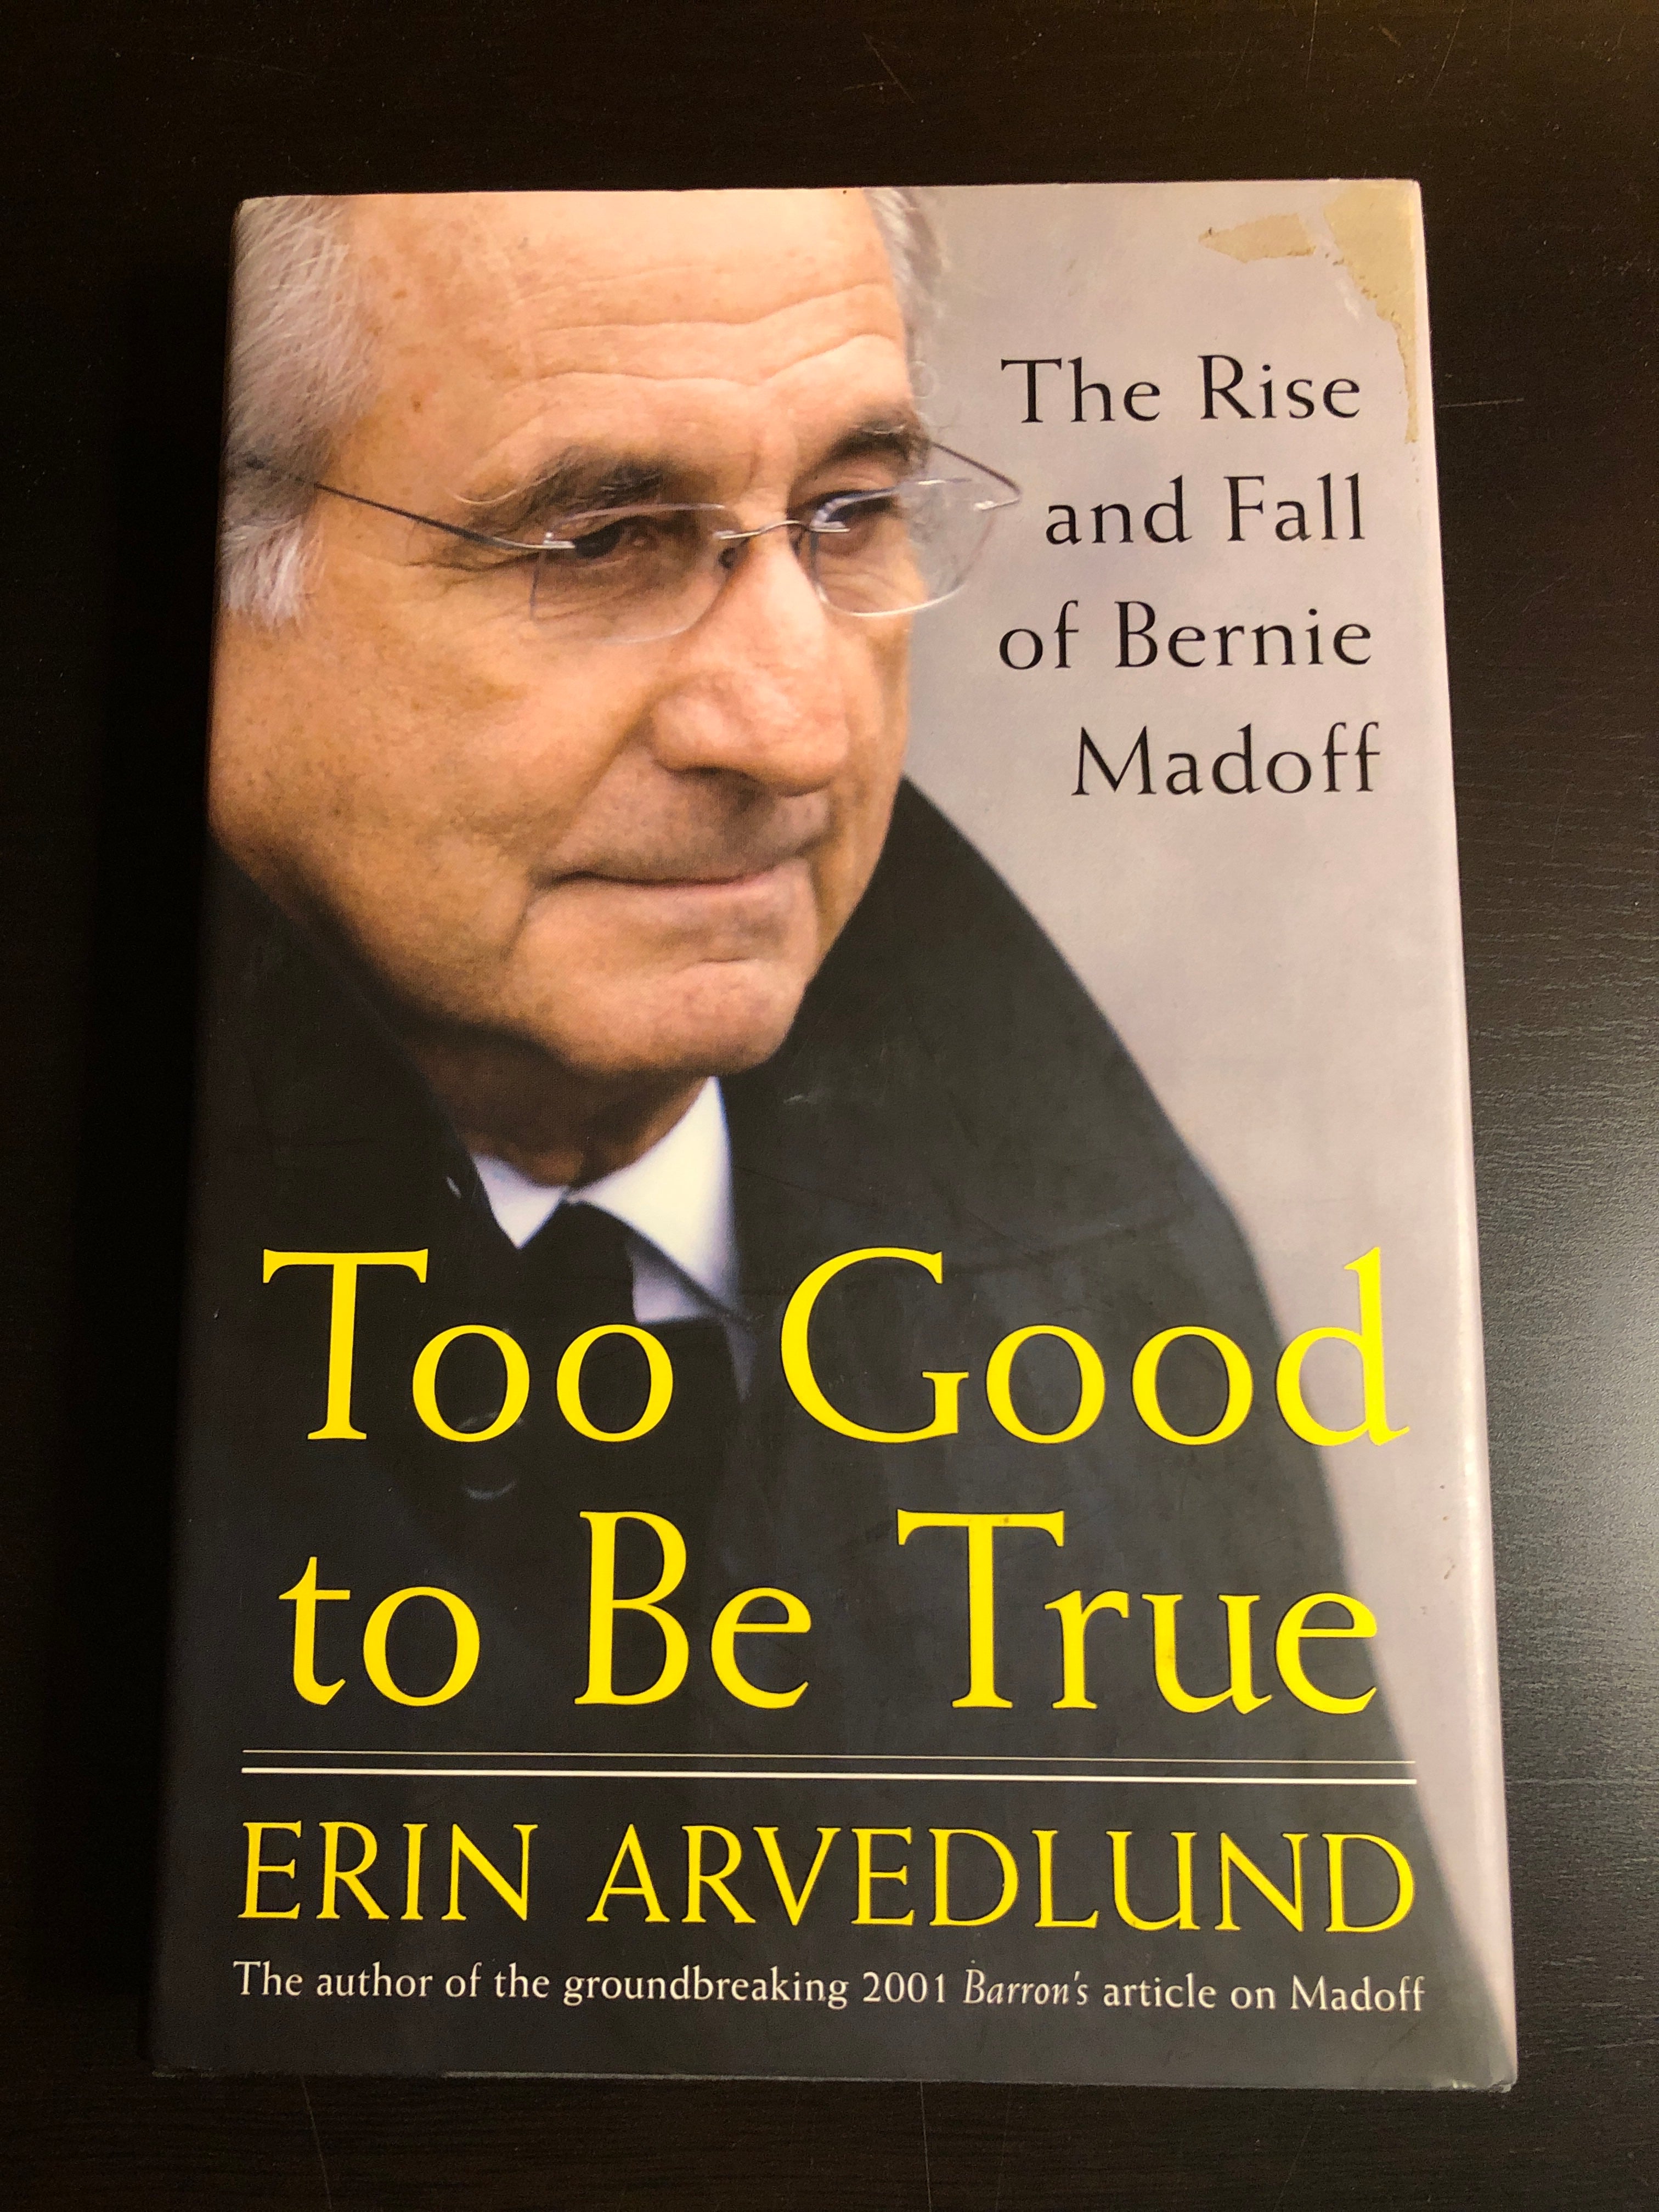 Fall　Too　–　and　Good　of　to　Be　True:　Madoff　The　Rise　Bernie　Exhibit　B.　Books